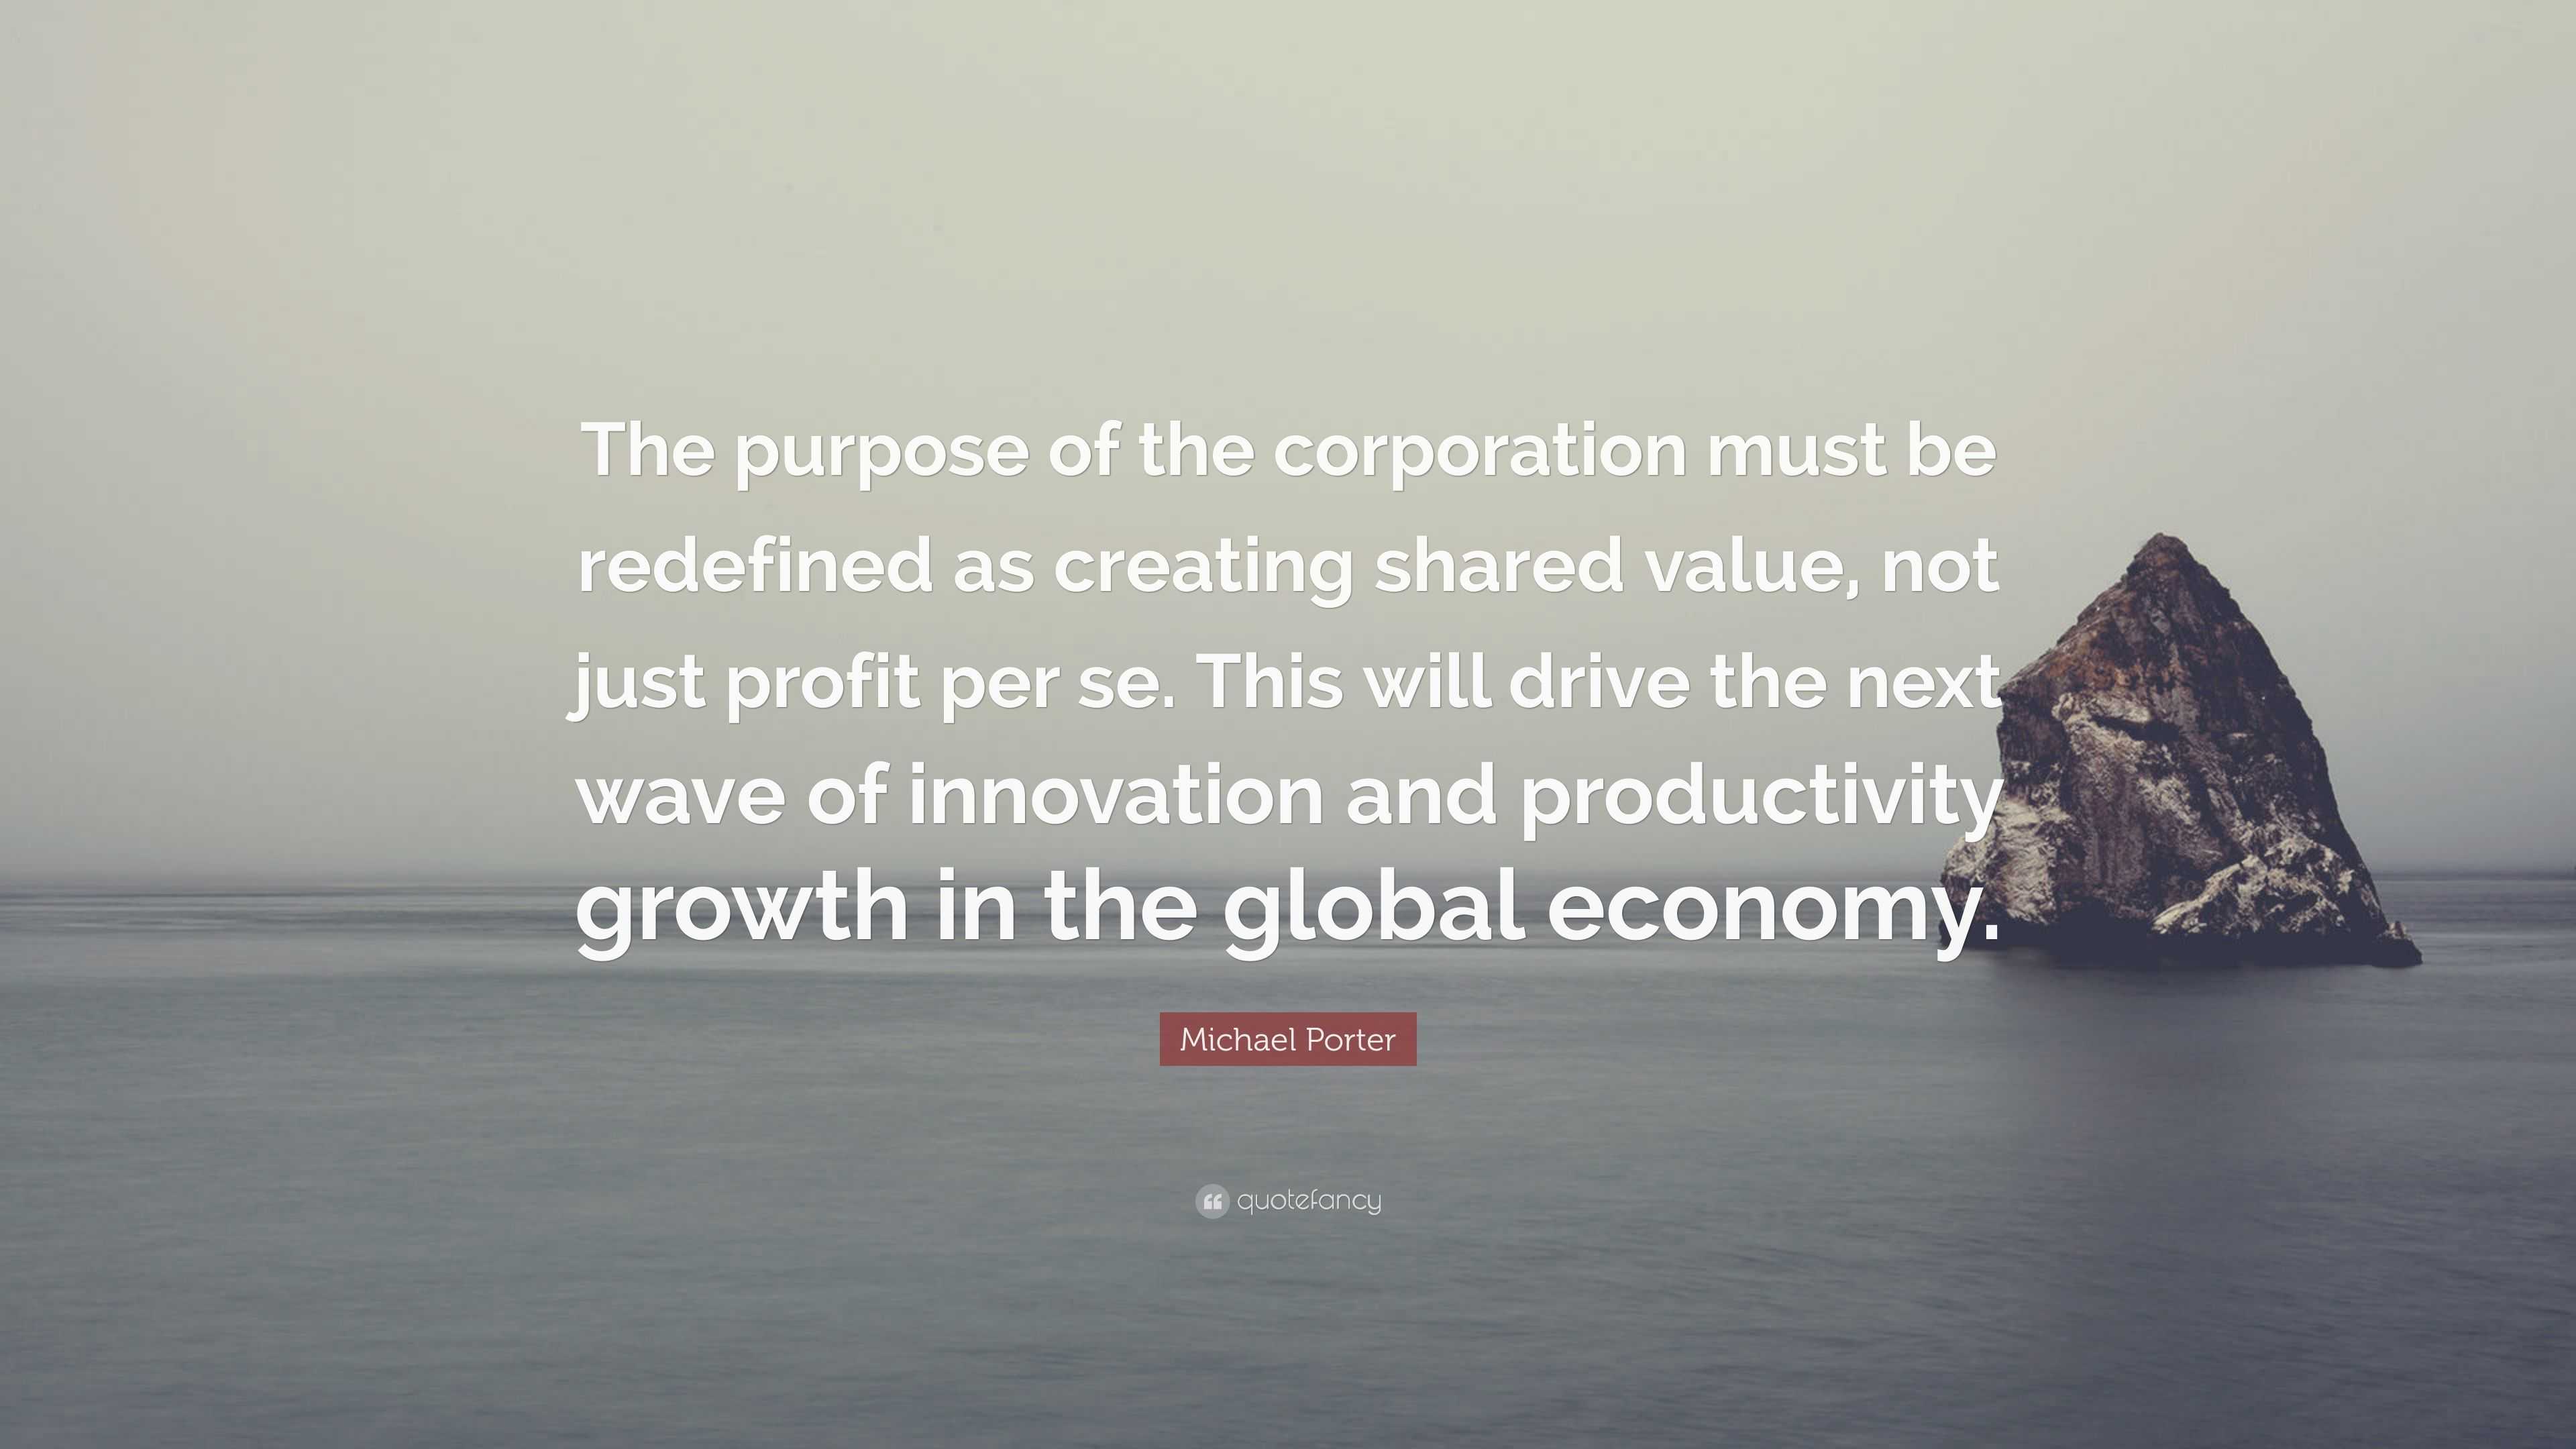 About the Corporation